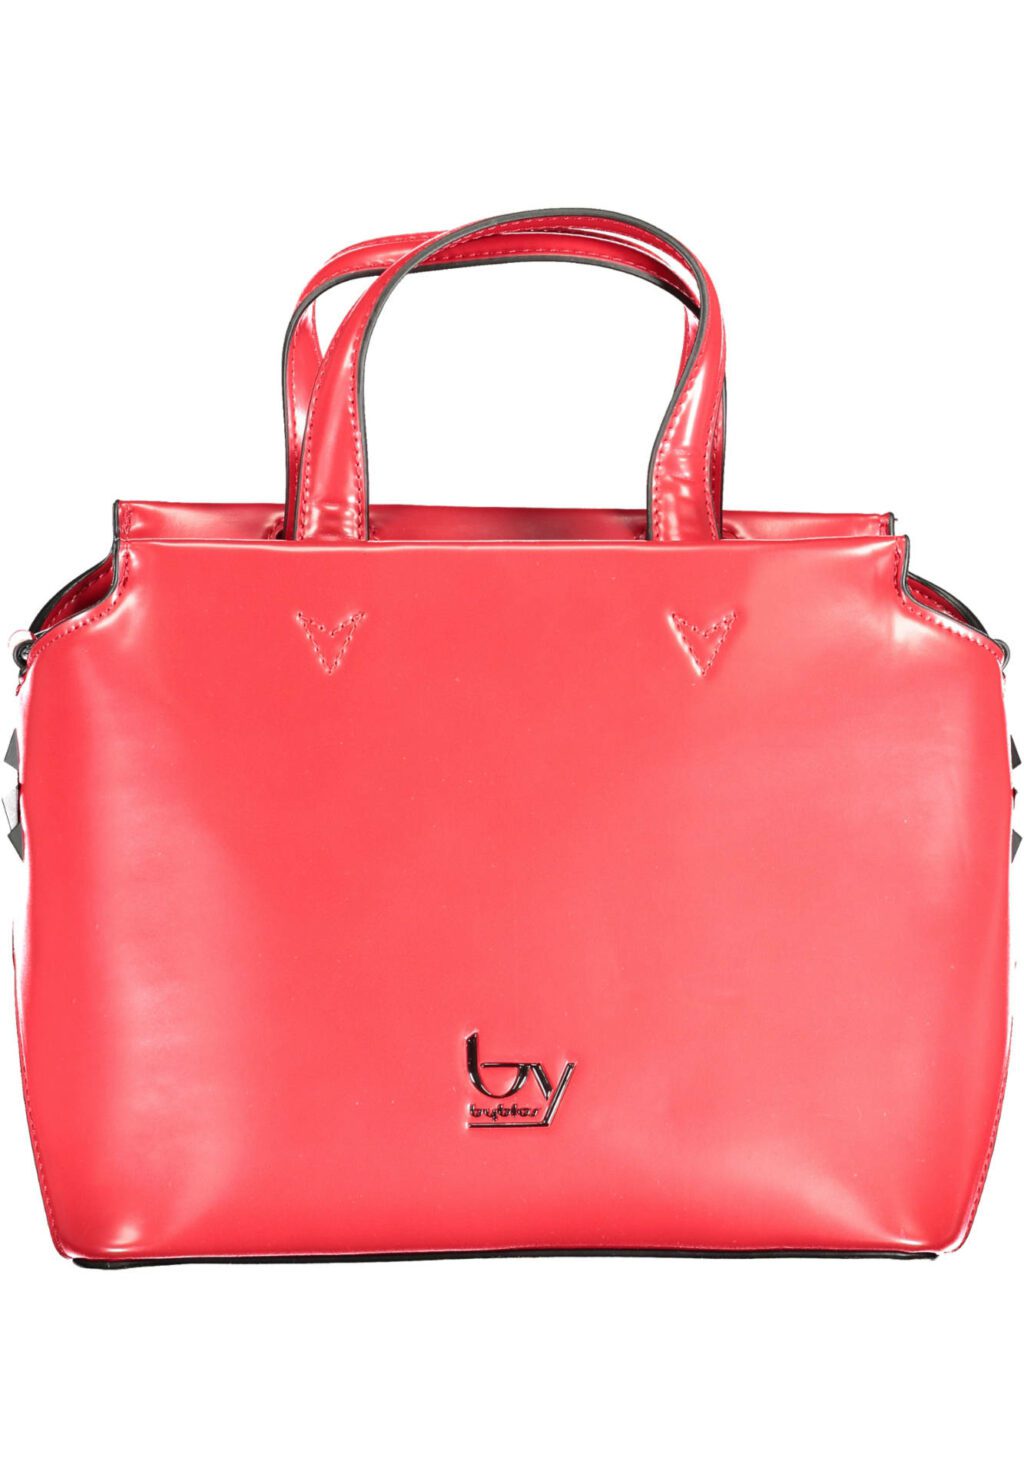 BYBLOS RED WOMEN'S BAG 20100096_ROSSO_4189-CHERRY